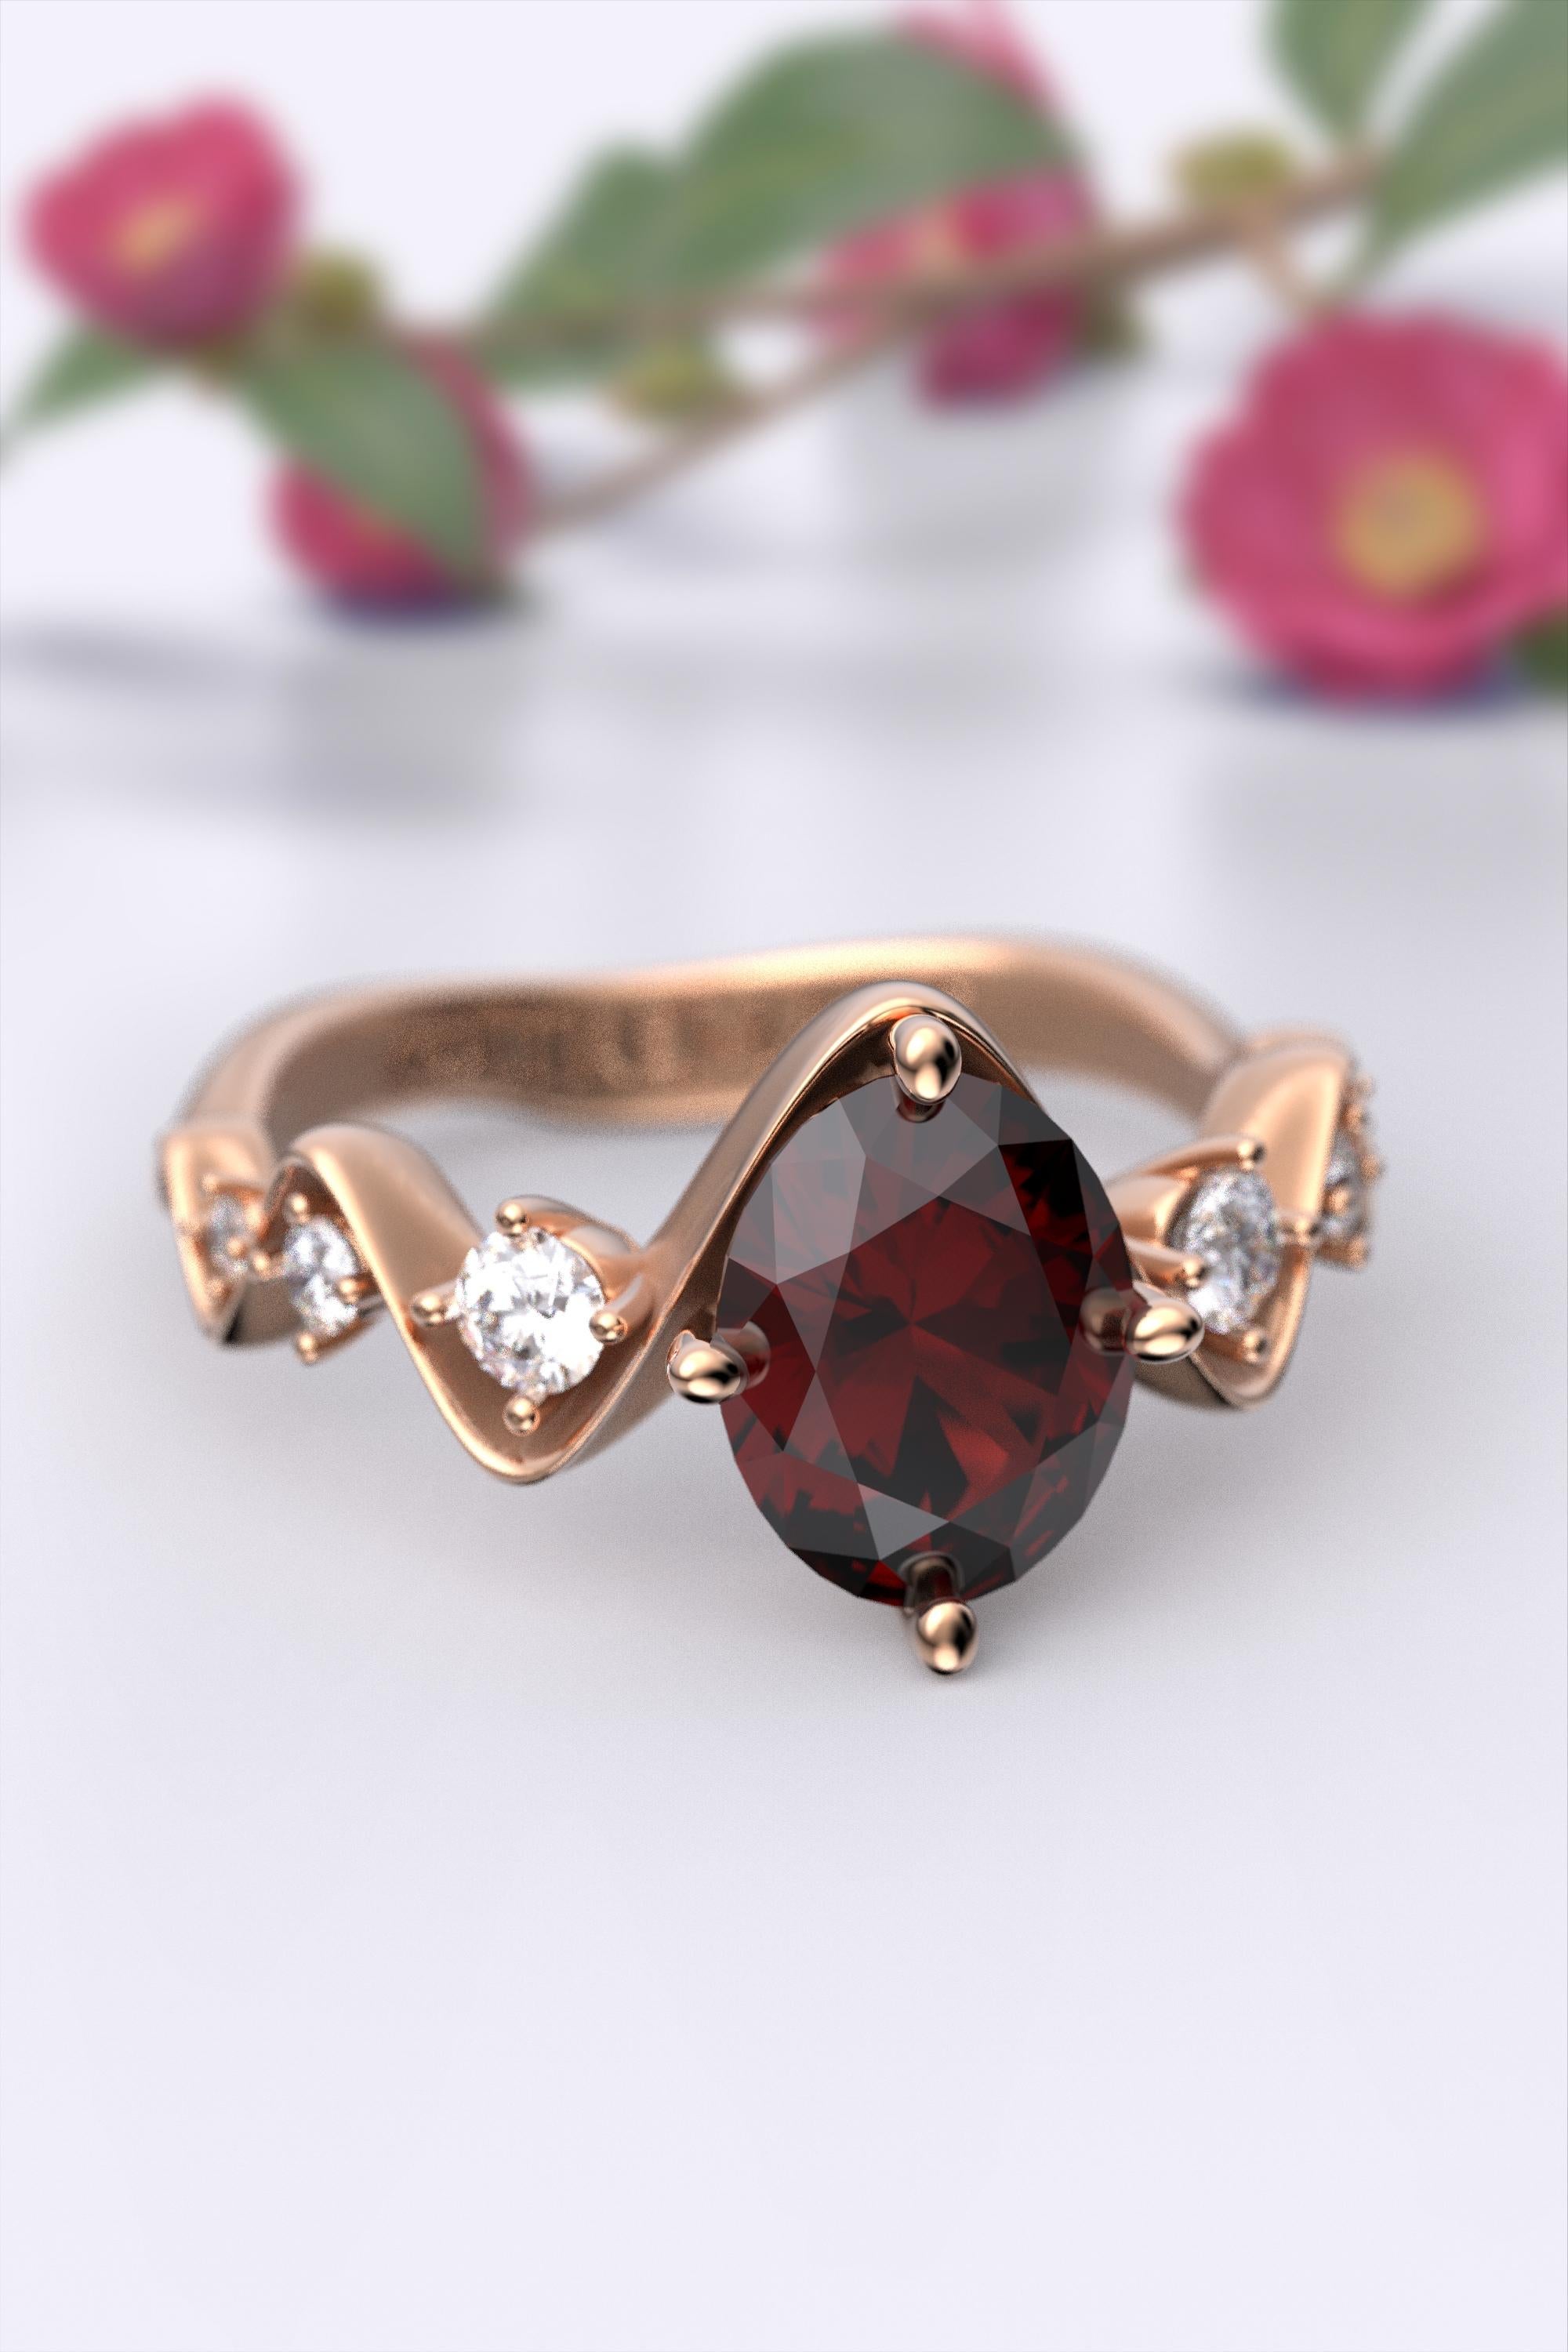 For Sale:  Garnet and Diamonds Engagement Ring Made in Italy by Oltremare Gioielli 18k Gold 11